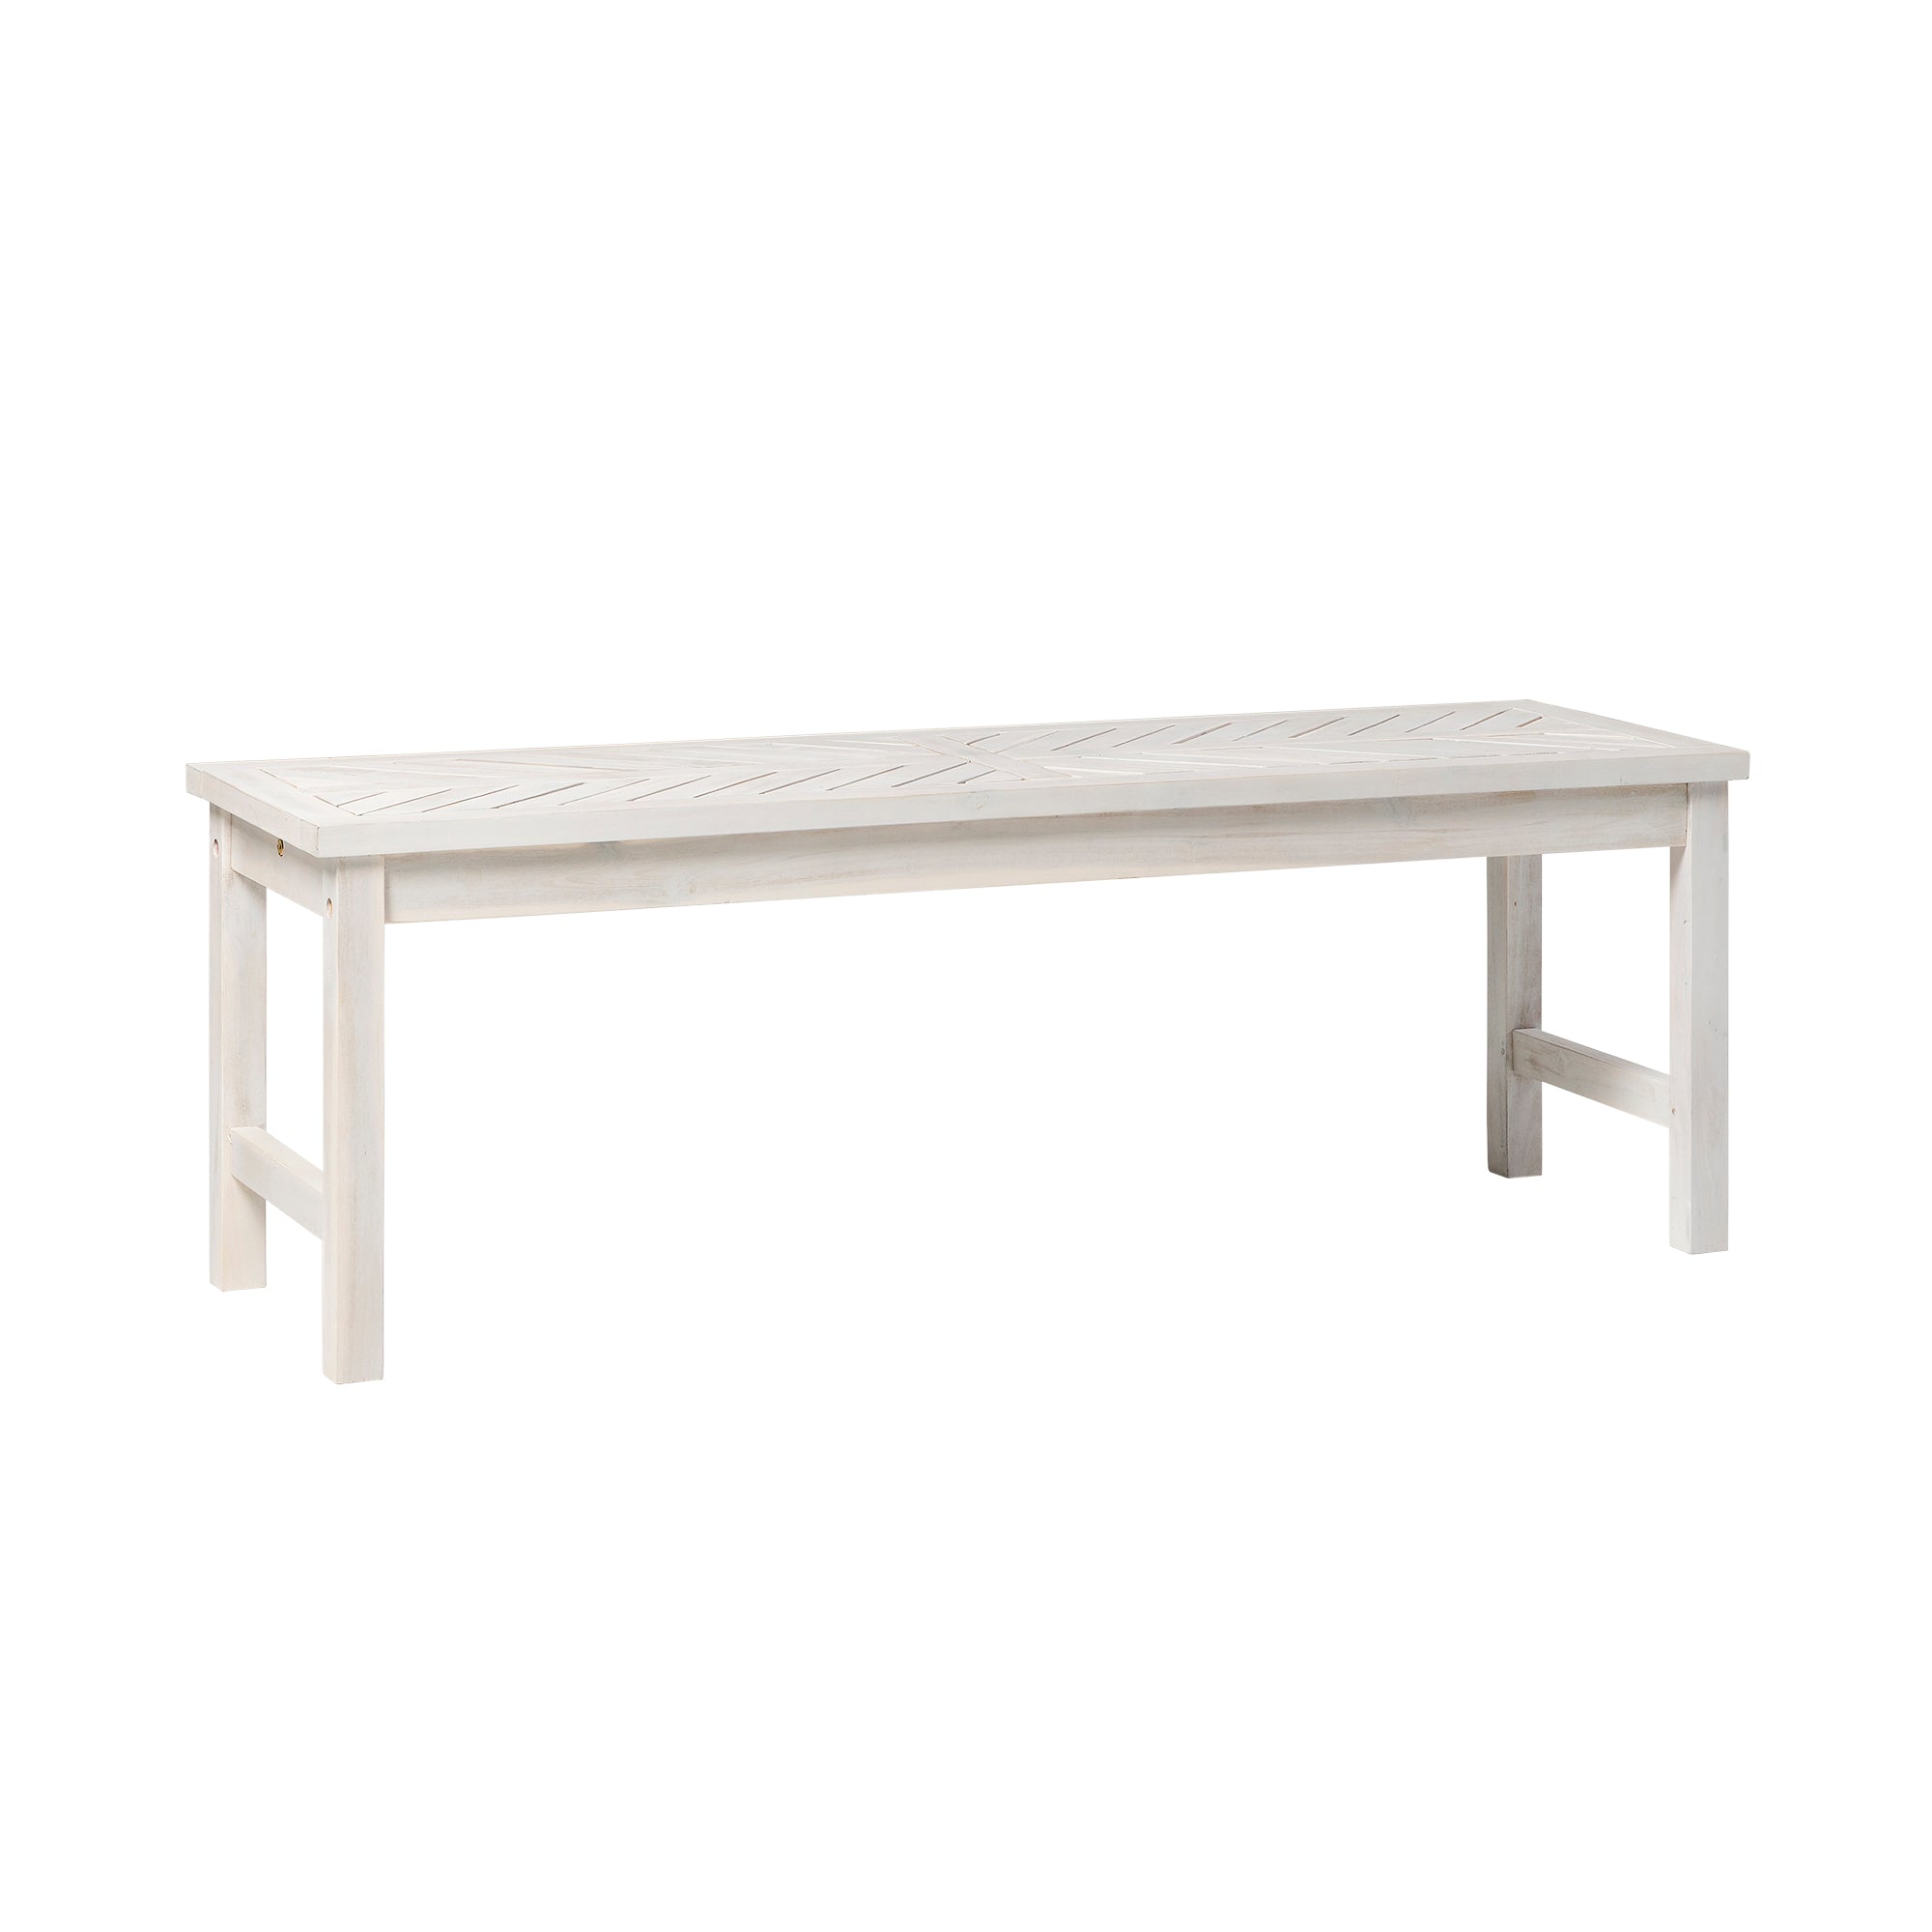 Vincent 53" Acacia Wood Chevron Dining Bench - East Shore Modern Home Furnishings